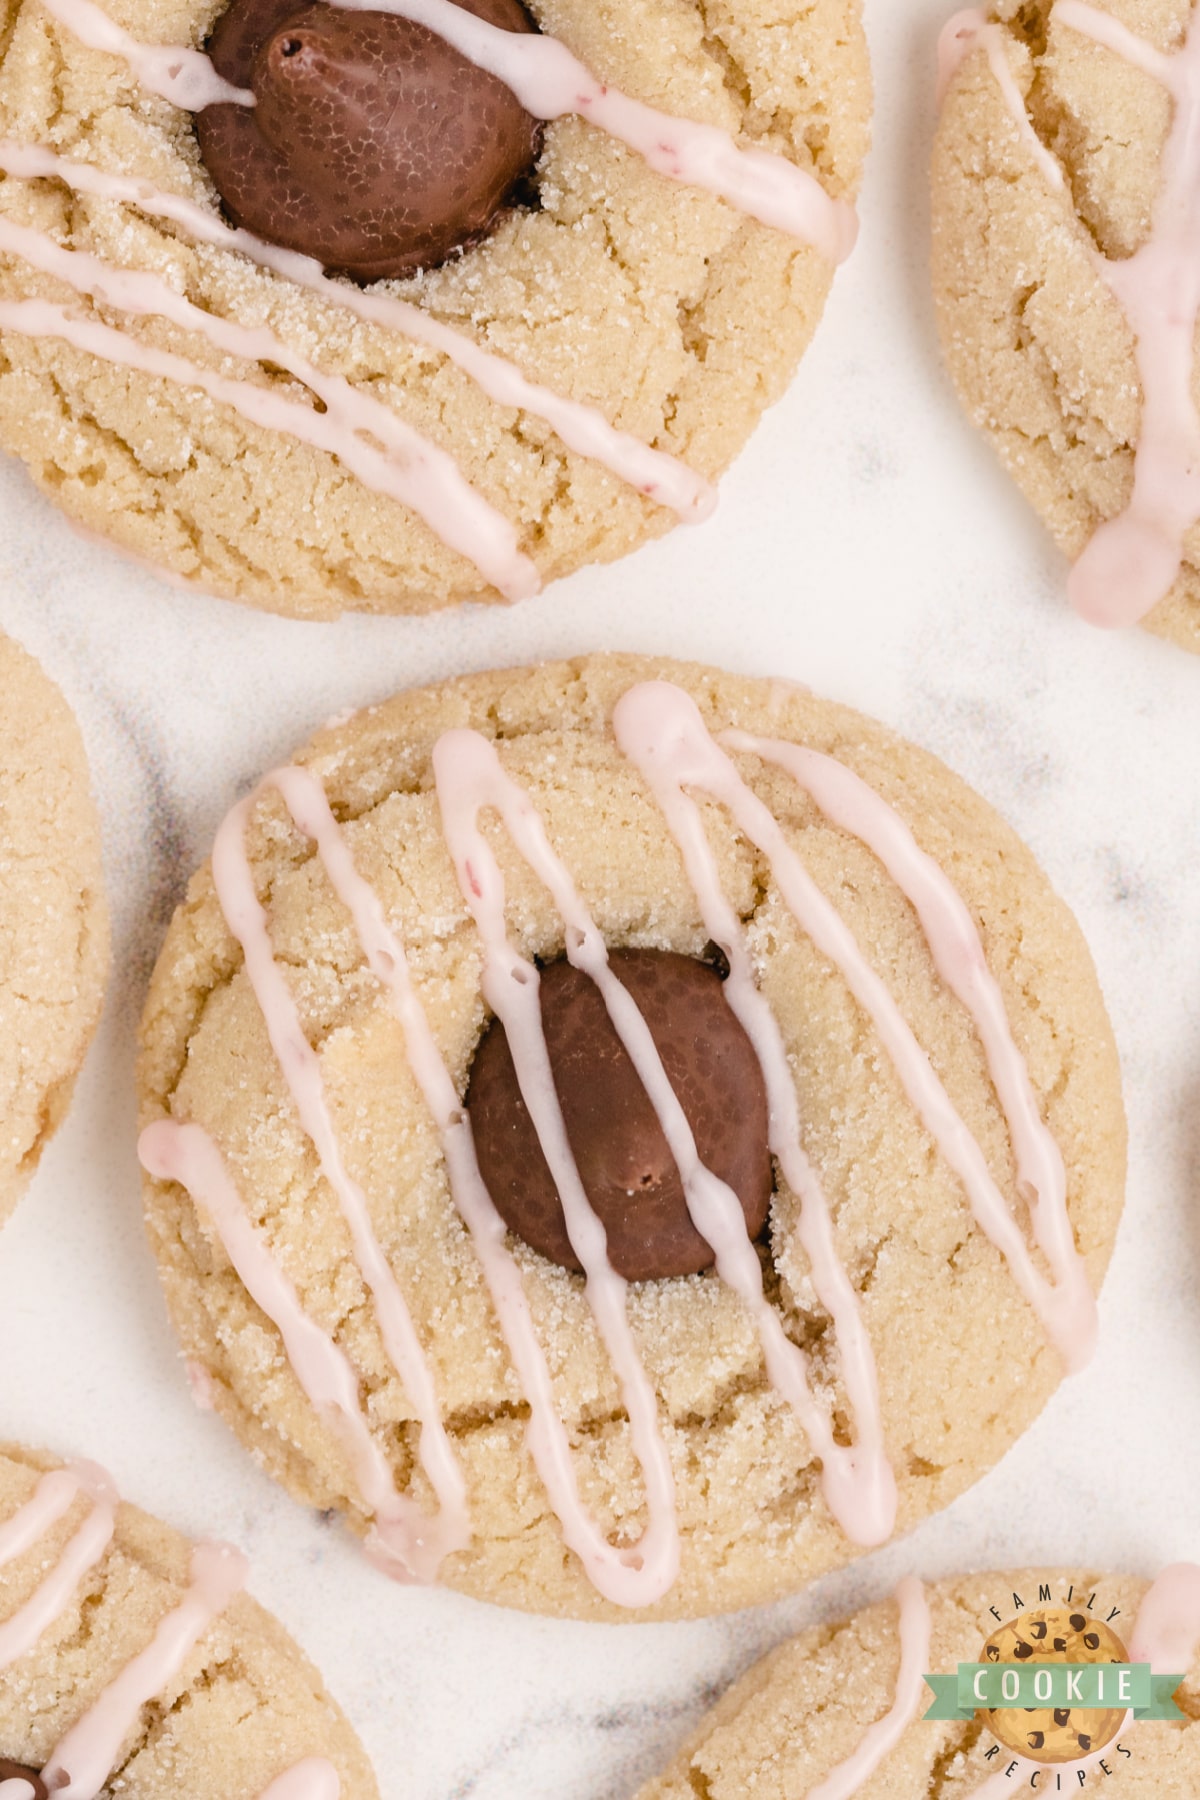 Almond Kiss Cookies made with almond extract and Hershey kisses with almonds! Drizzled with a simple raspberry glaze, these make a fantastic alternative to the traditional peanut butter blossoms!